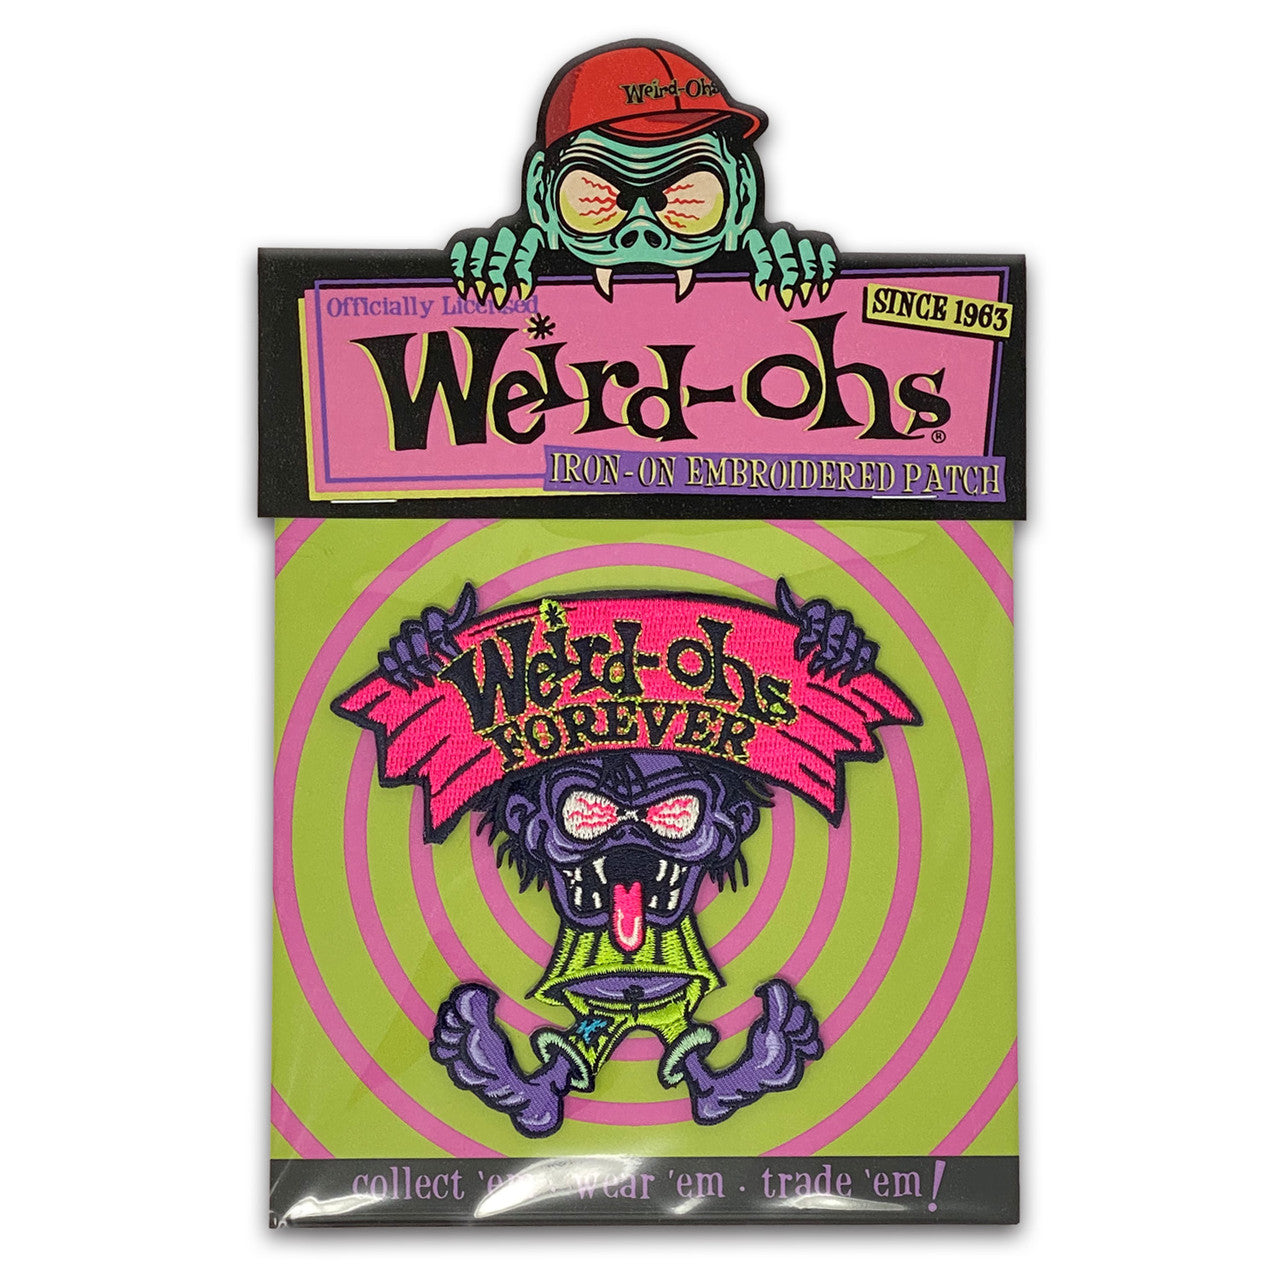 Weird-Ohs Forever Patch